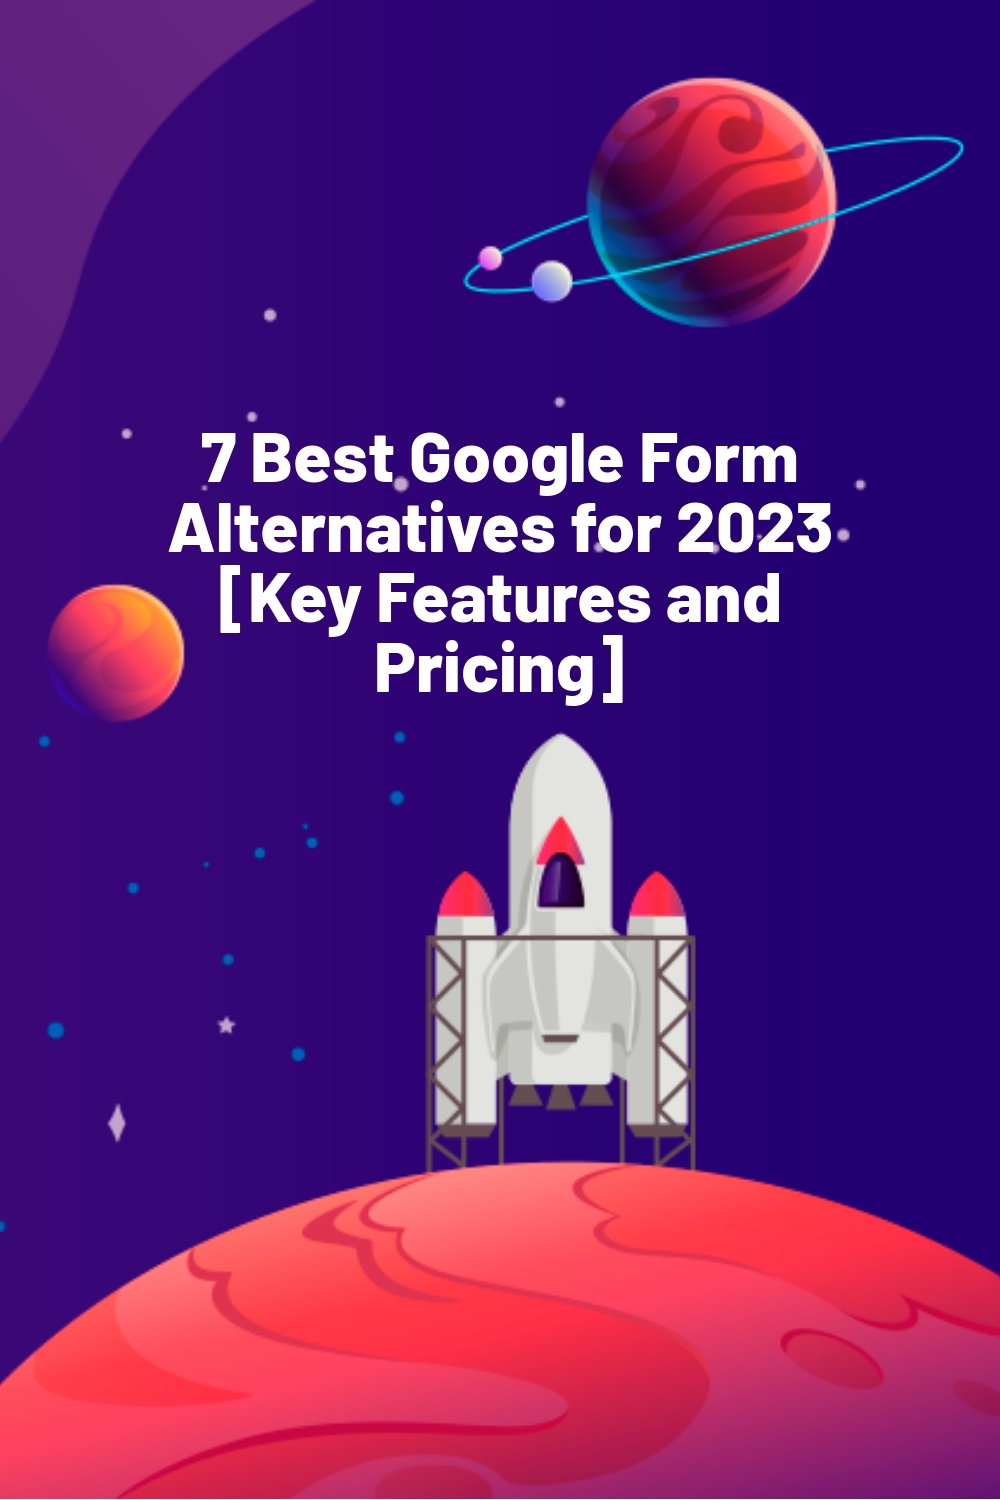 7 Best Google Form Alternatives for 2023 [Key Features and Pricing]